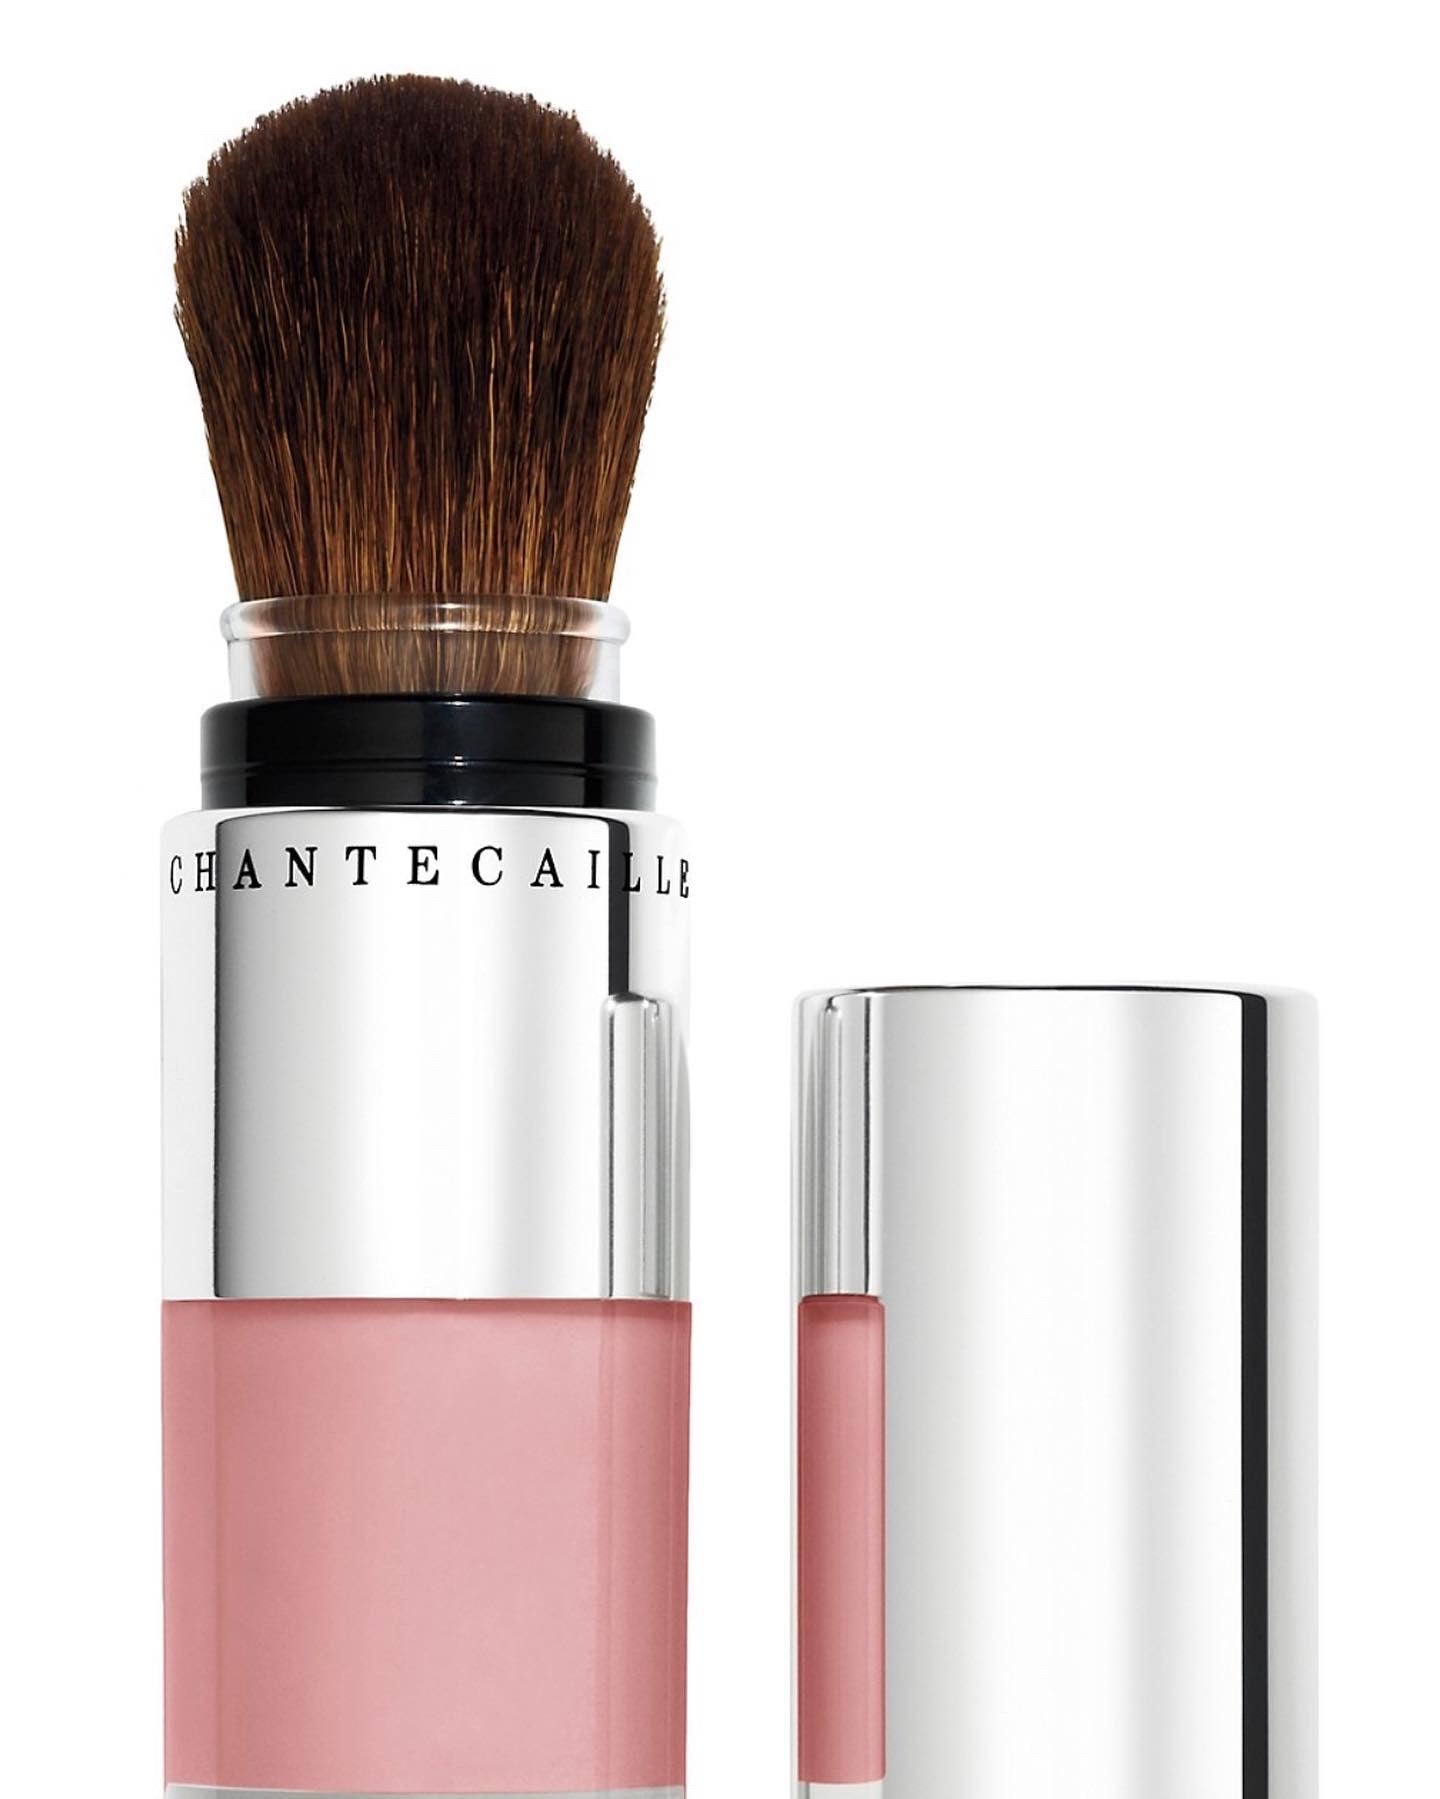 CHANTECAILLE, THE GIRAFFE COLLECTION HOPE HD RADIANT BLUSH